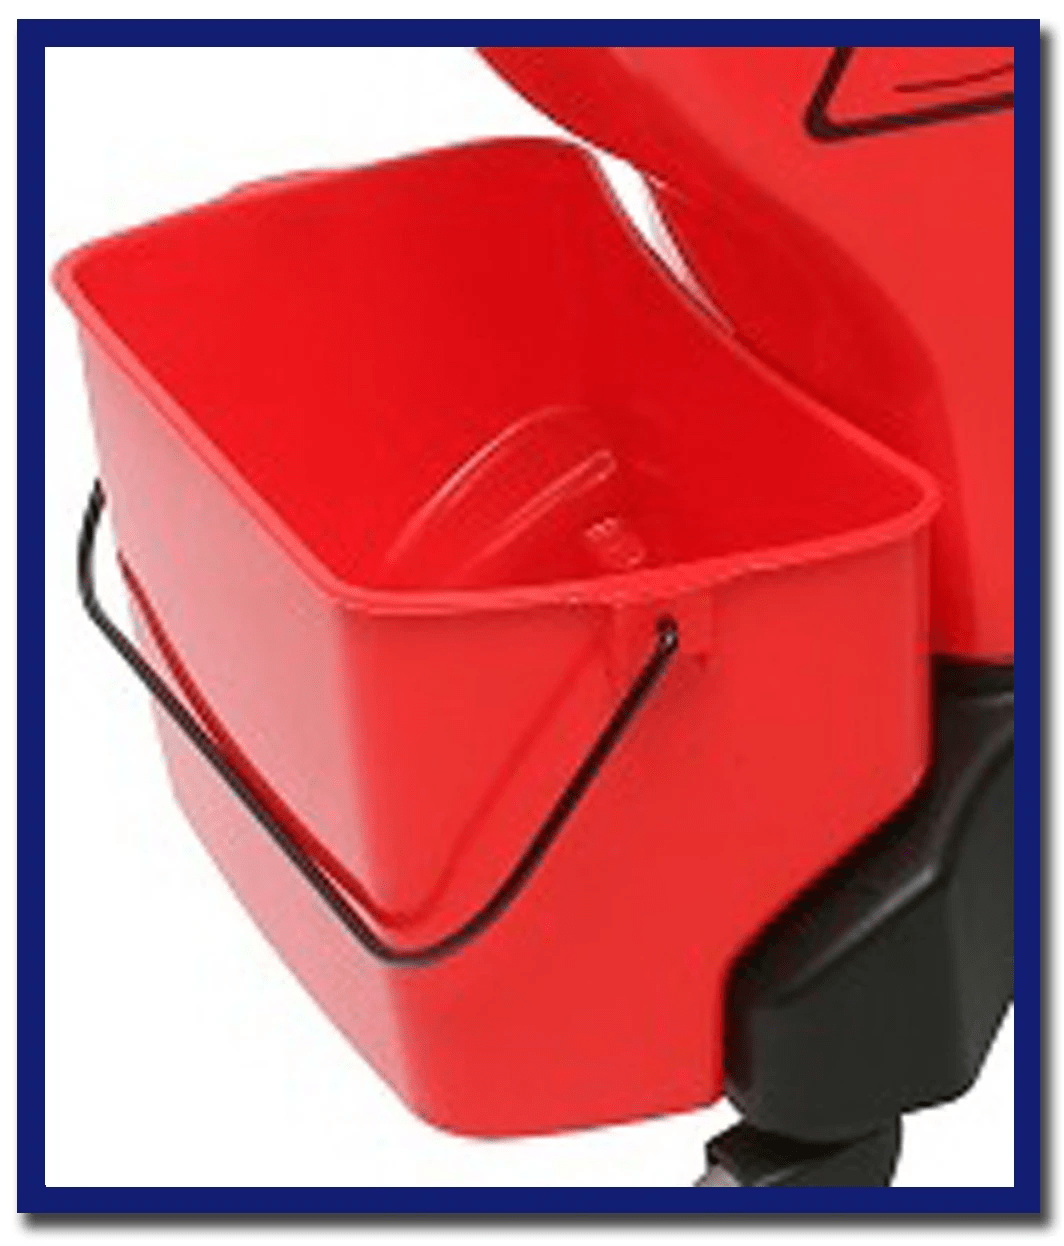 Edco Enduro Press Small Buckets - 1 Unit - Stone Doctor Australia - Cleaning Accessories > Mopping > Buckets